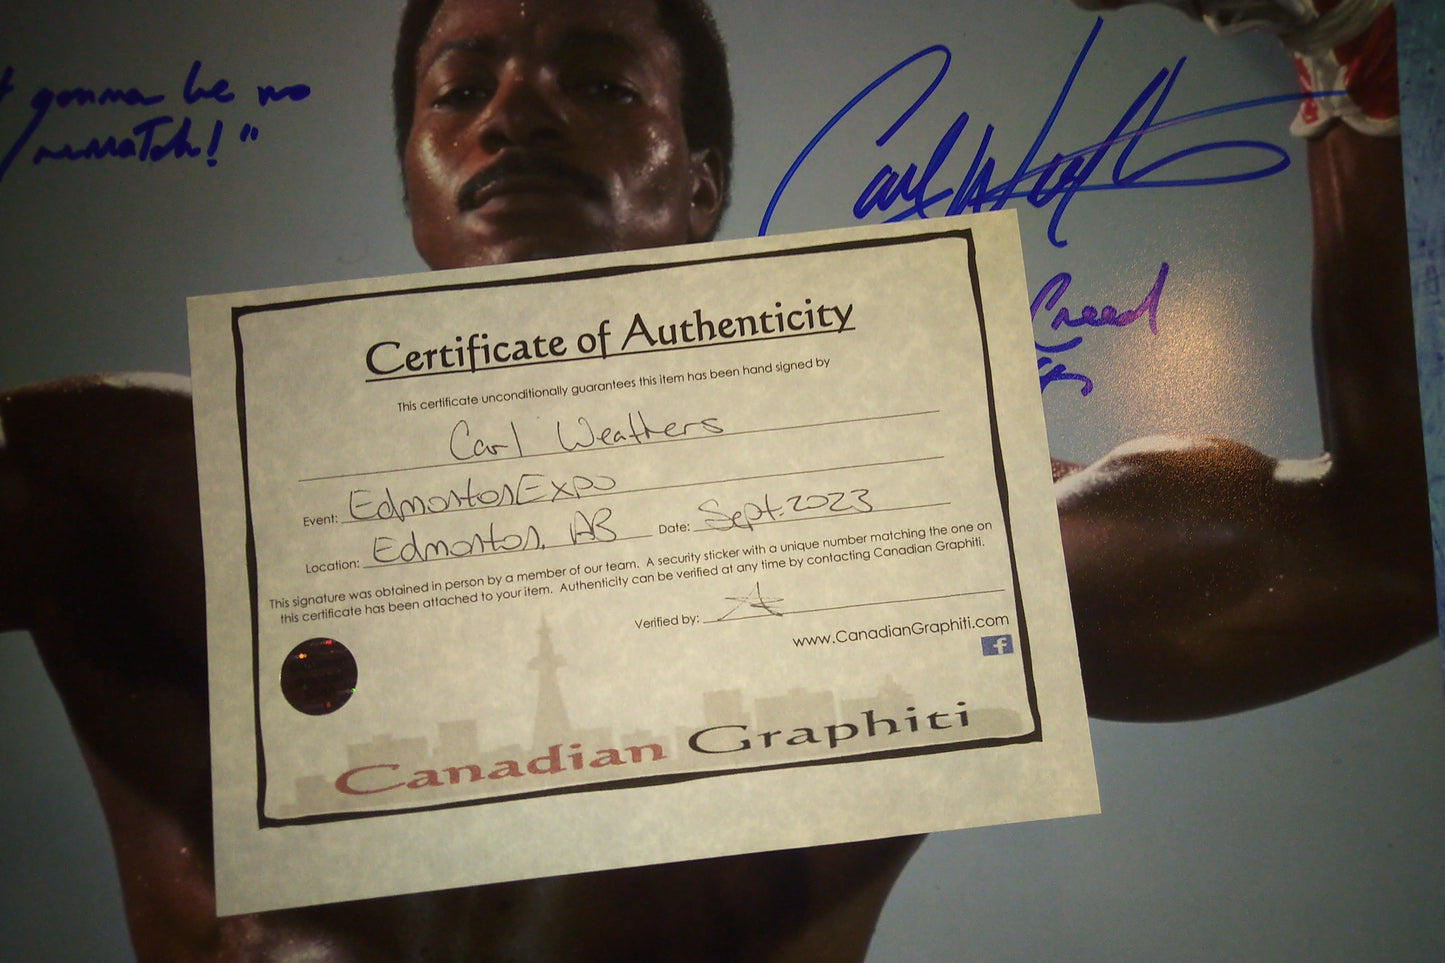 Carl Weathers Hand Signed Autograph 11x14 Photo